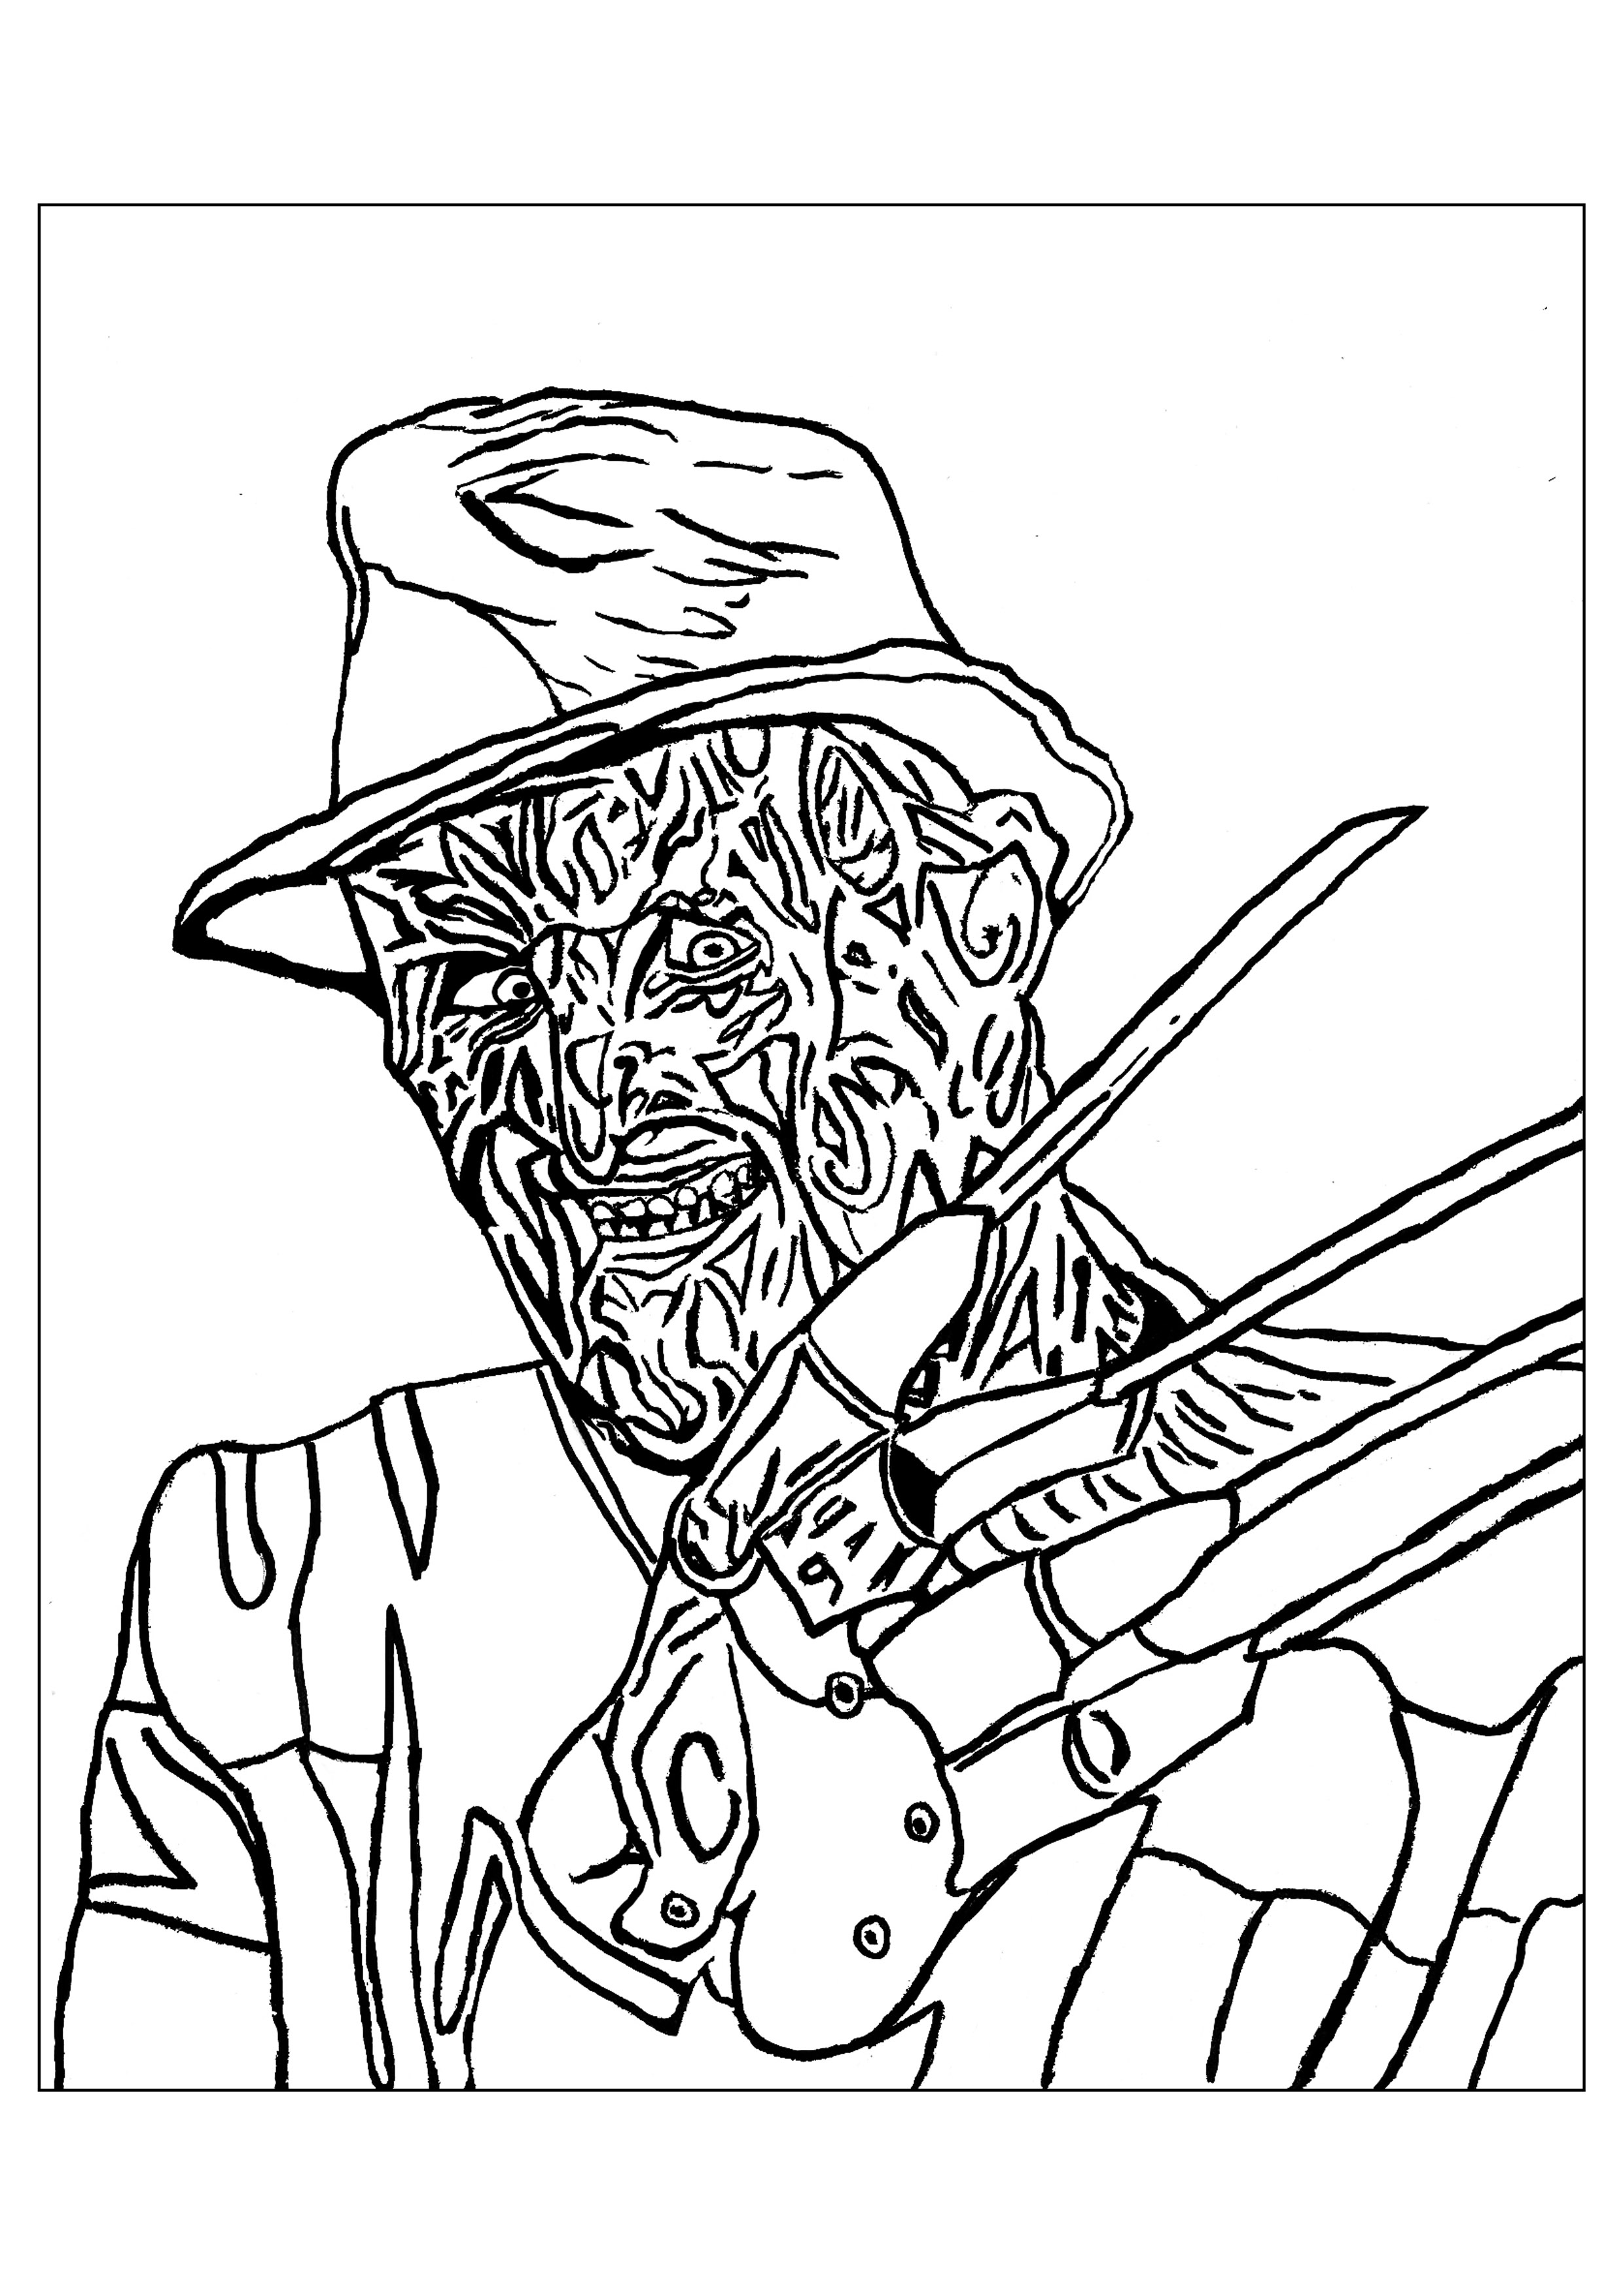 A scary coloring page of Freddie Krueger, perfect for Halloween